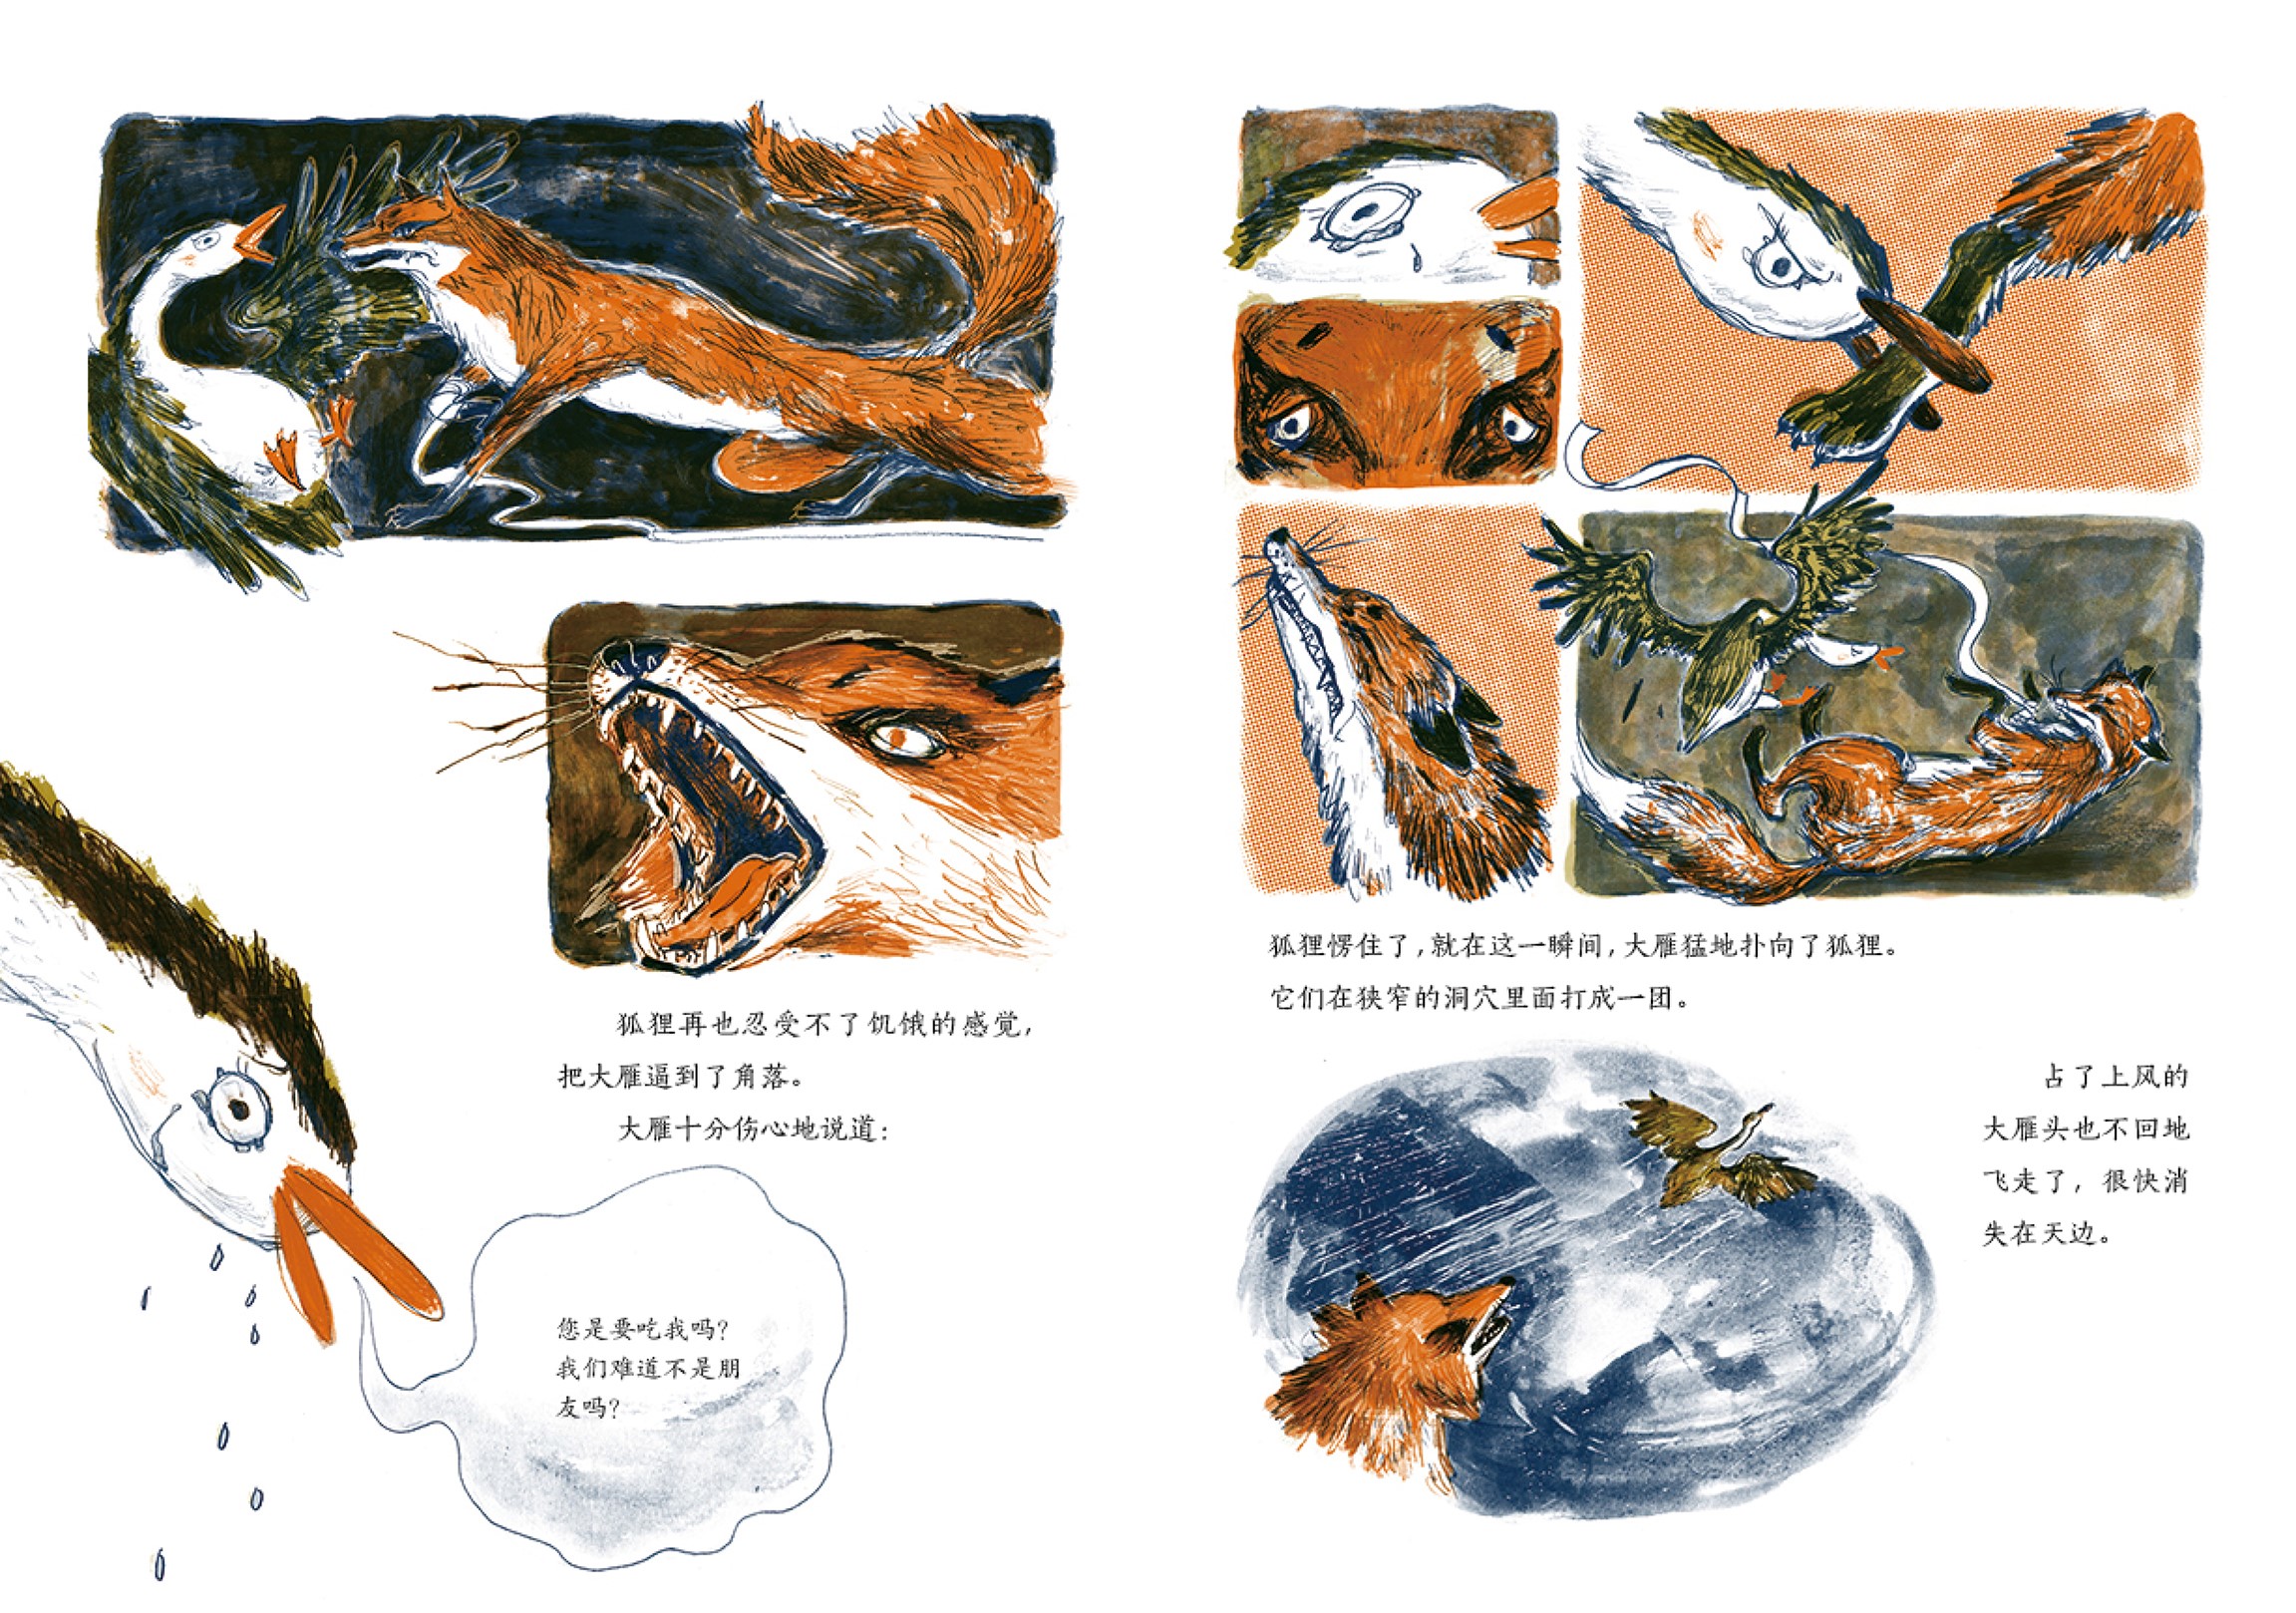 Double page spread with illustrations of a fox and goose fighting